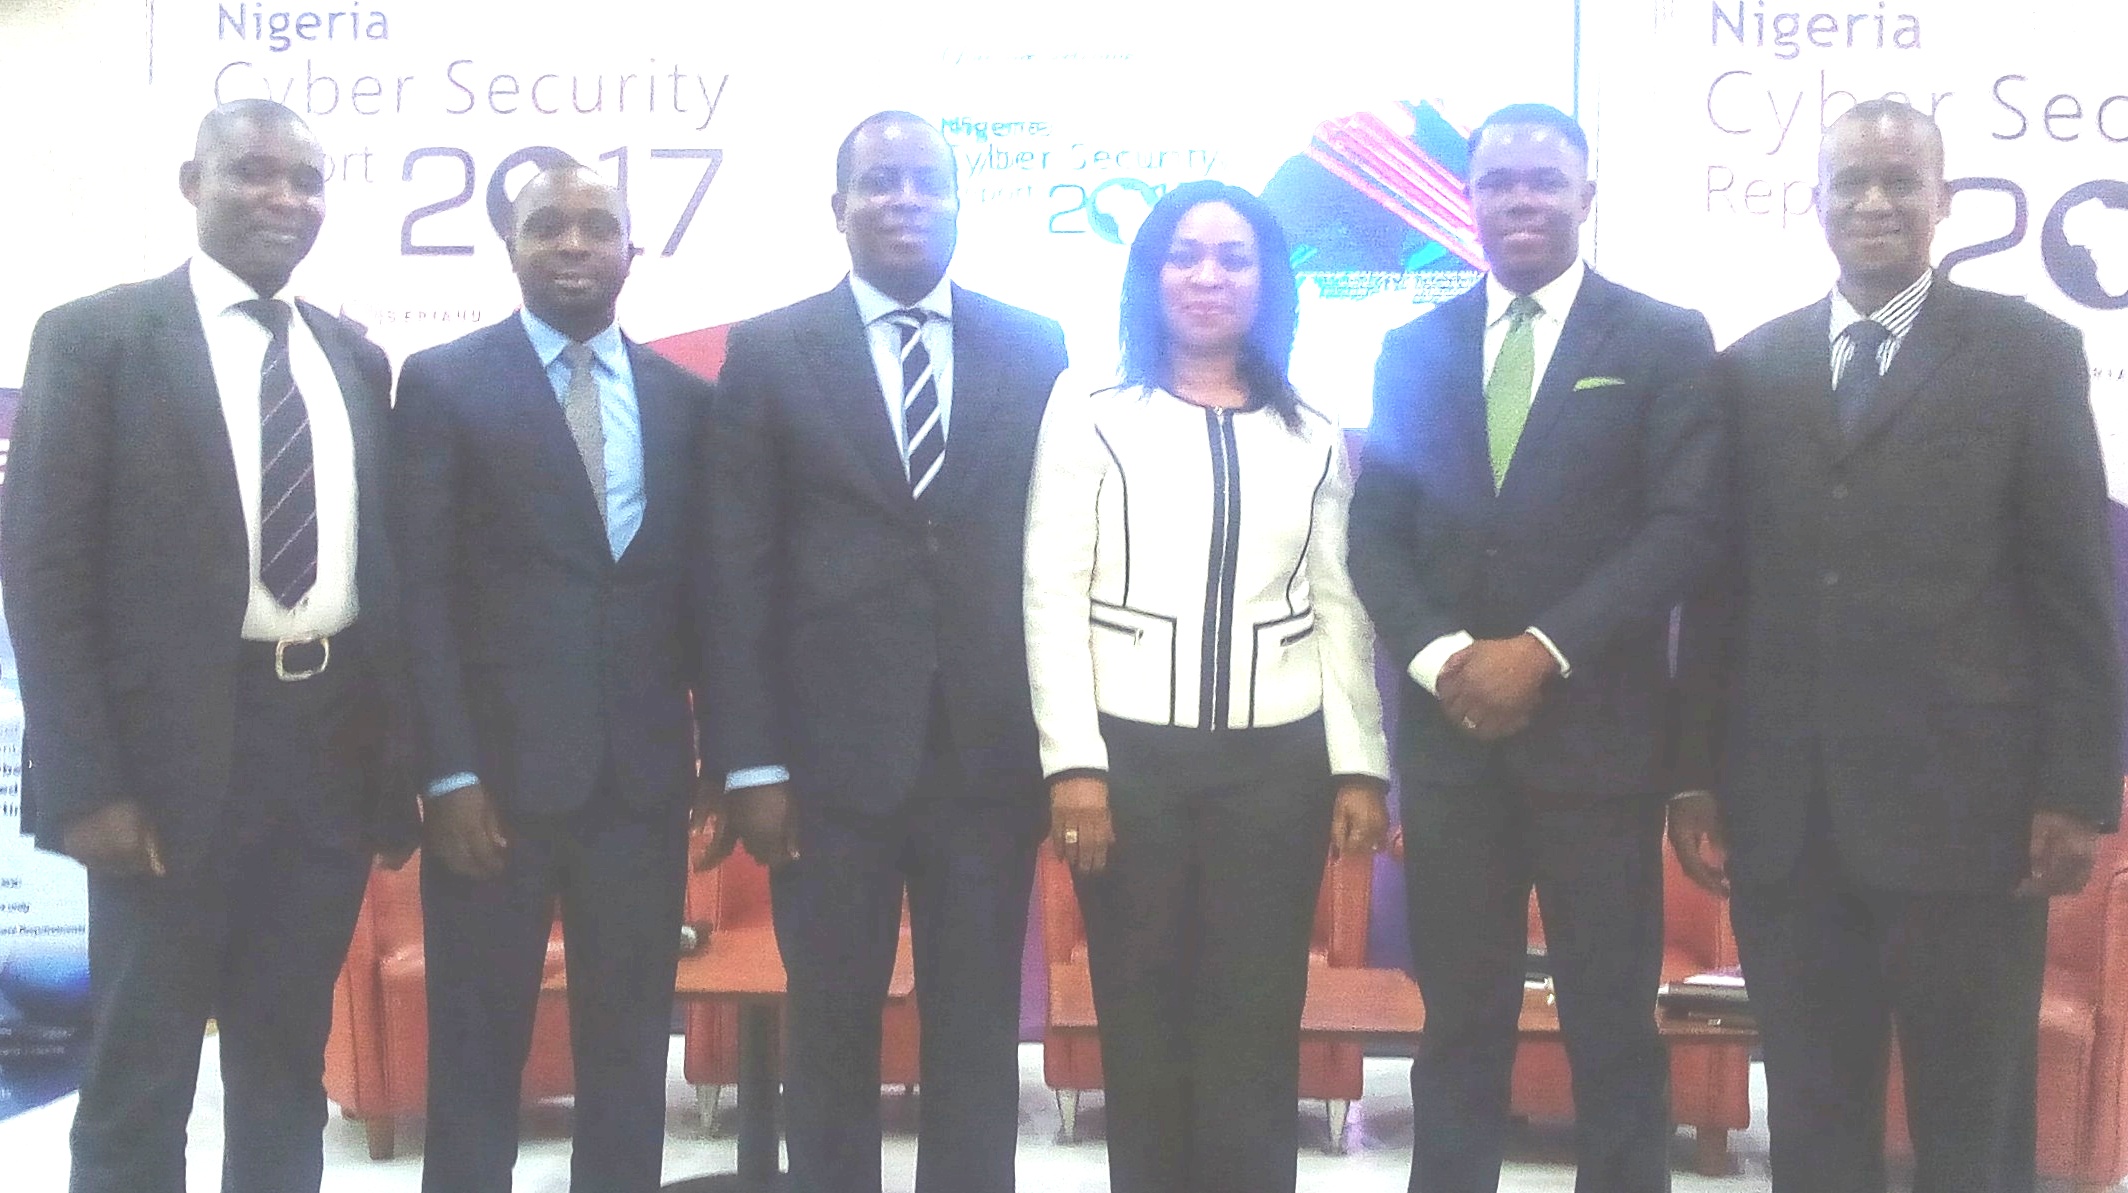 Experts make case for cyber security framework as report